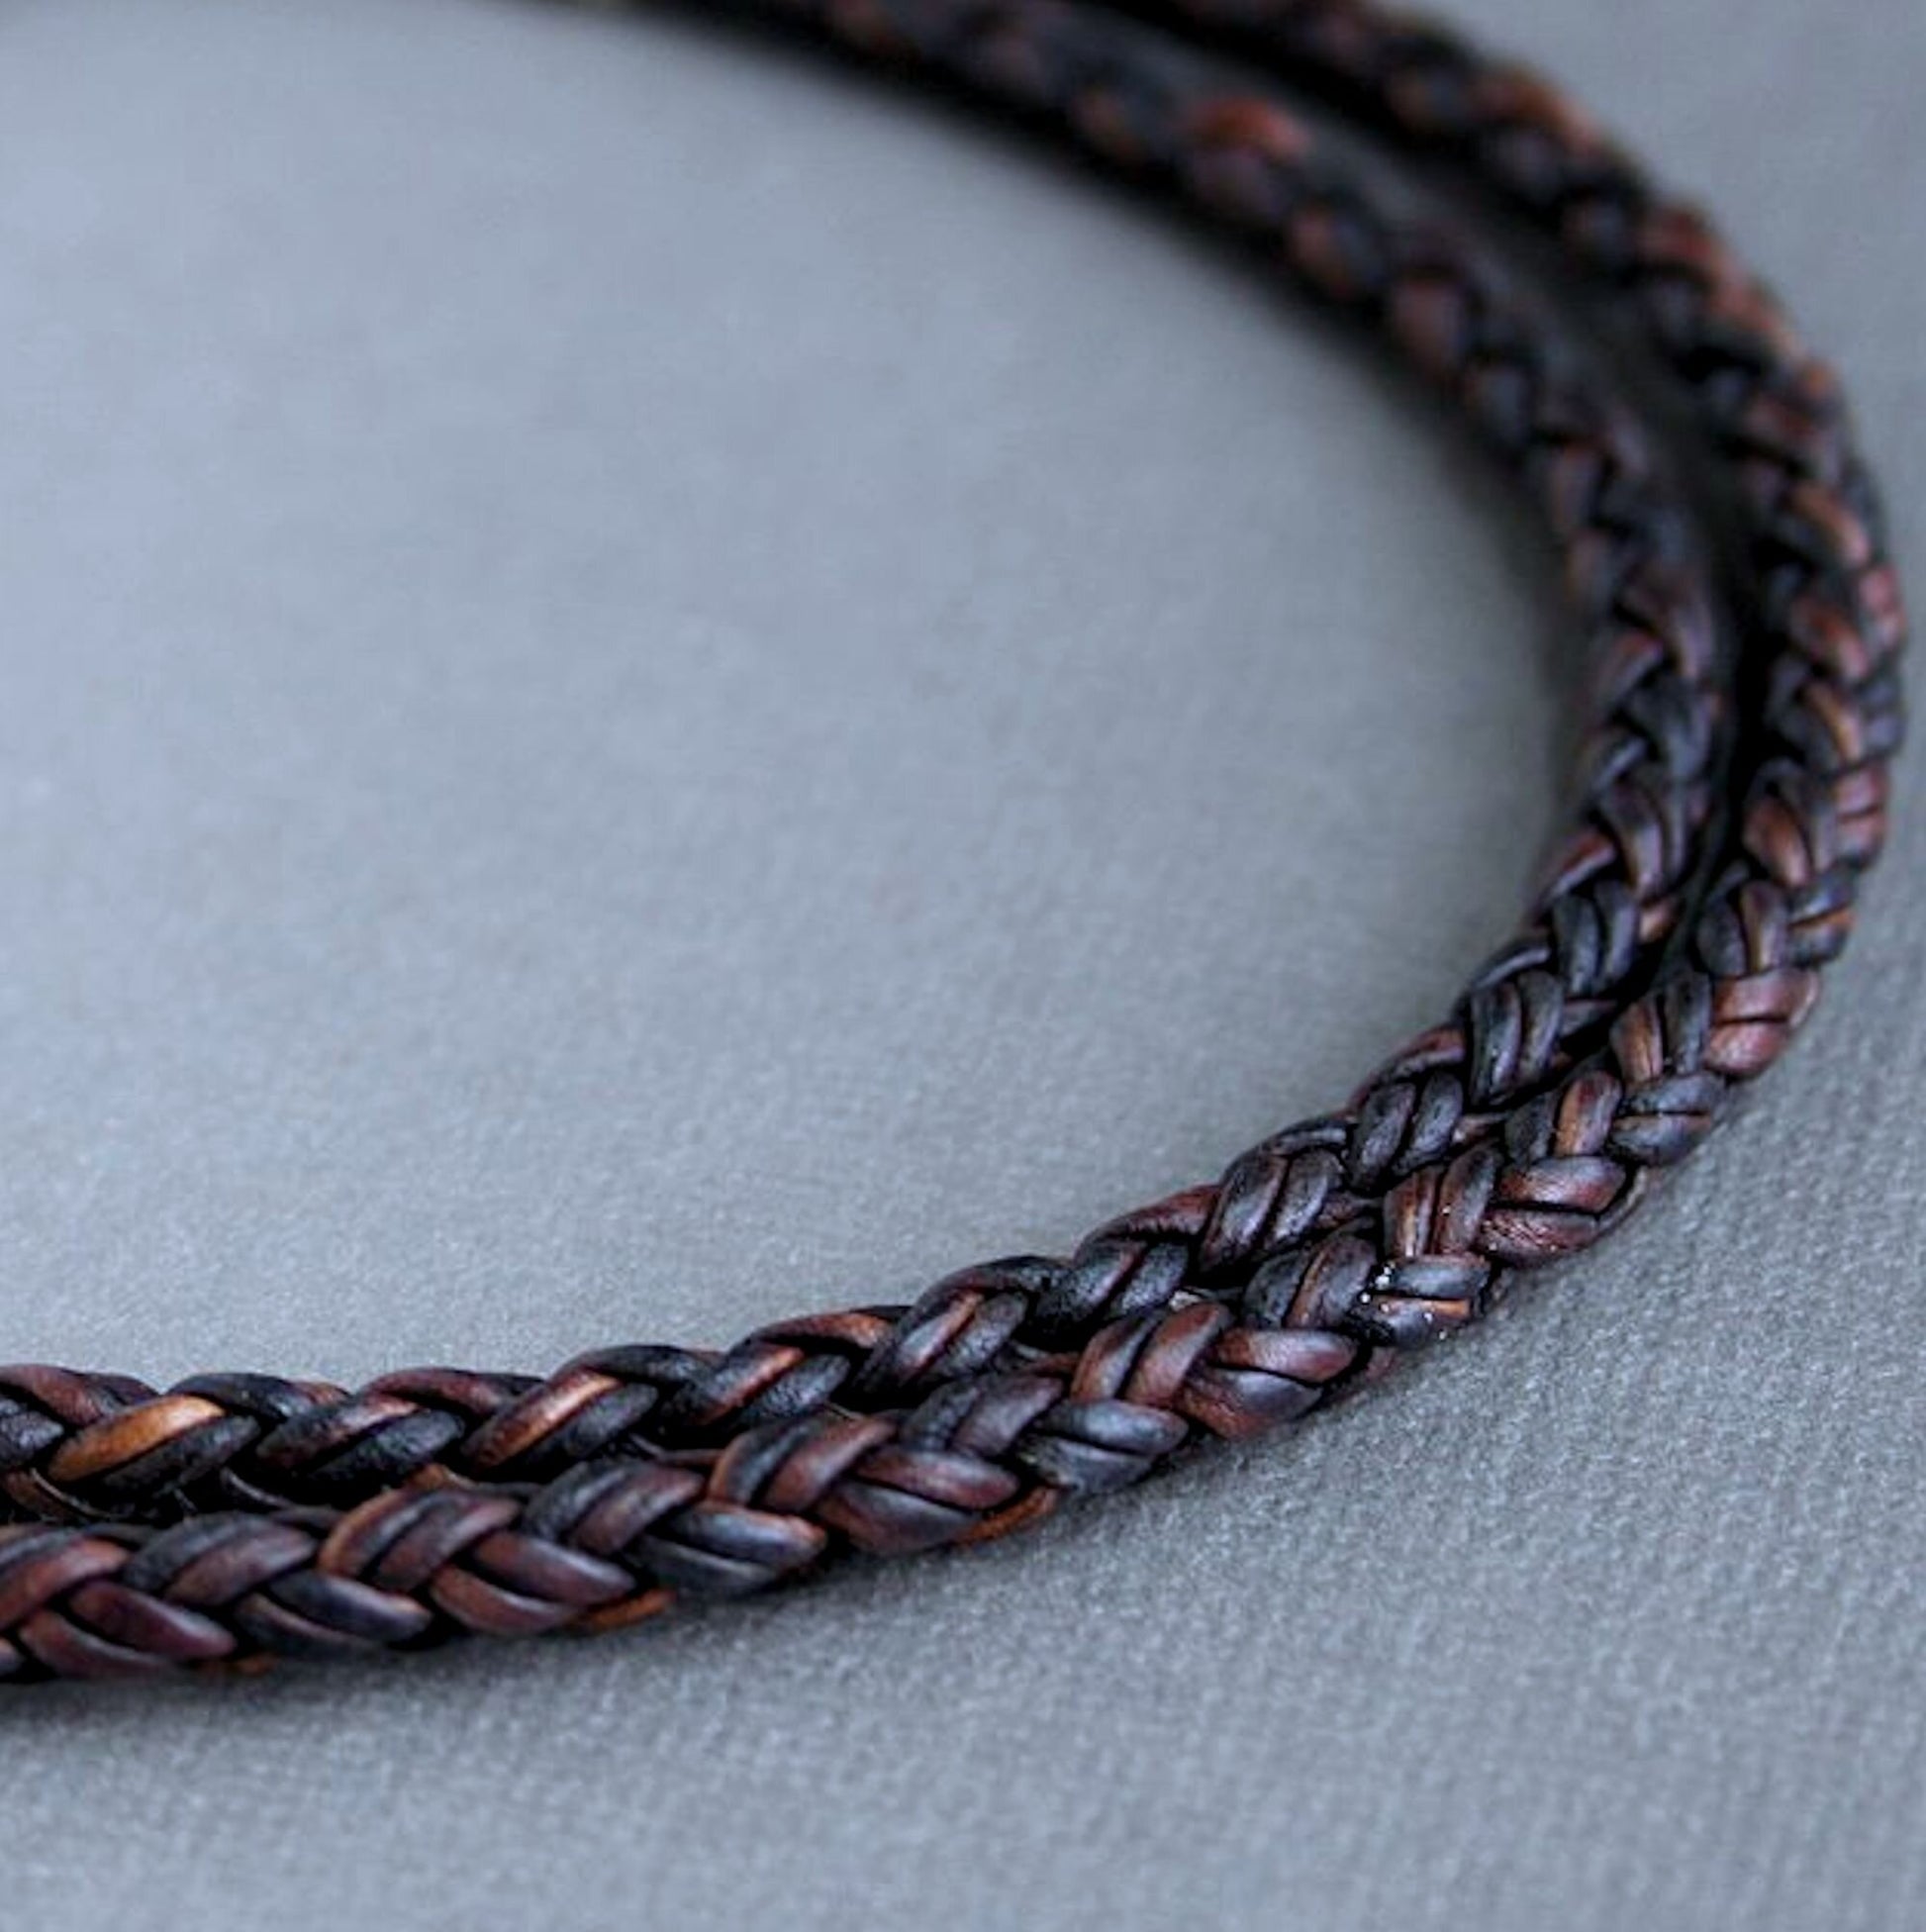 Standard Brown Flat Braided Leather Cord, For Bracelet,Jewellery